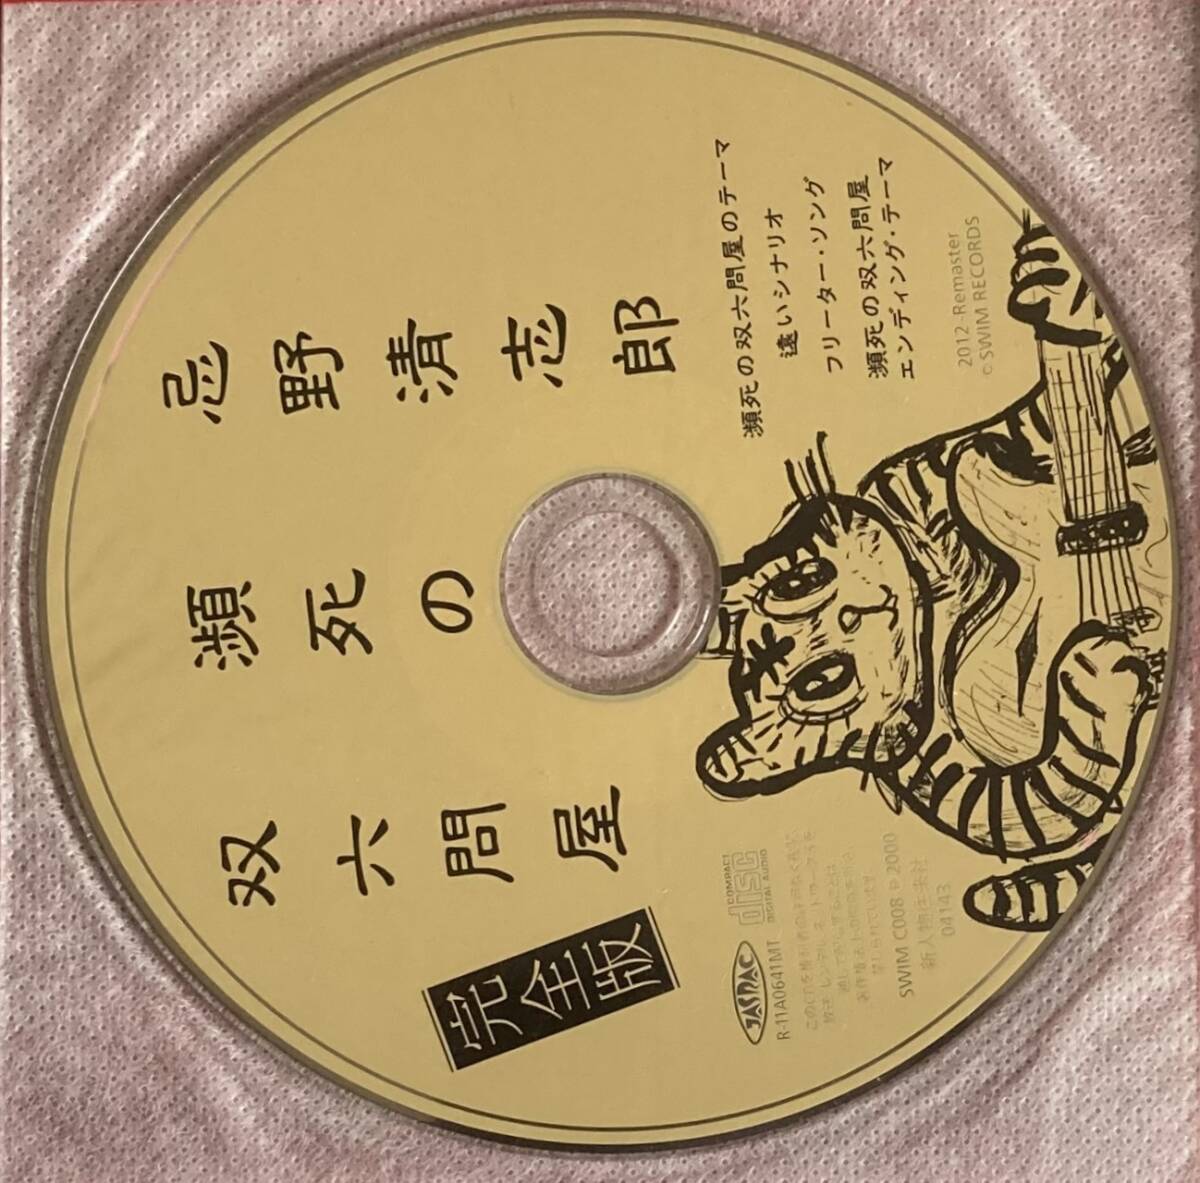  Imawano Kiyoshiro ... . six wholesale store ( complete version ) legend. problem work rhinoceros ketelik*no bell & essay 2012 year obi * Special made CD attaching superior article!